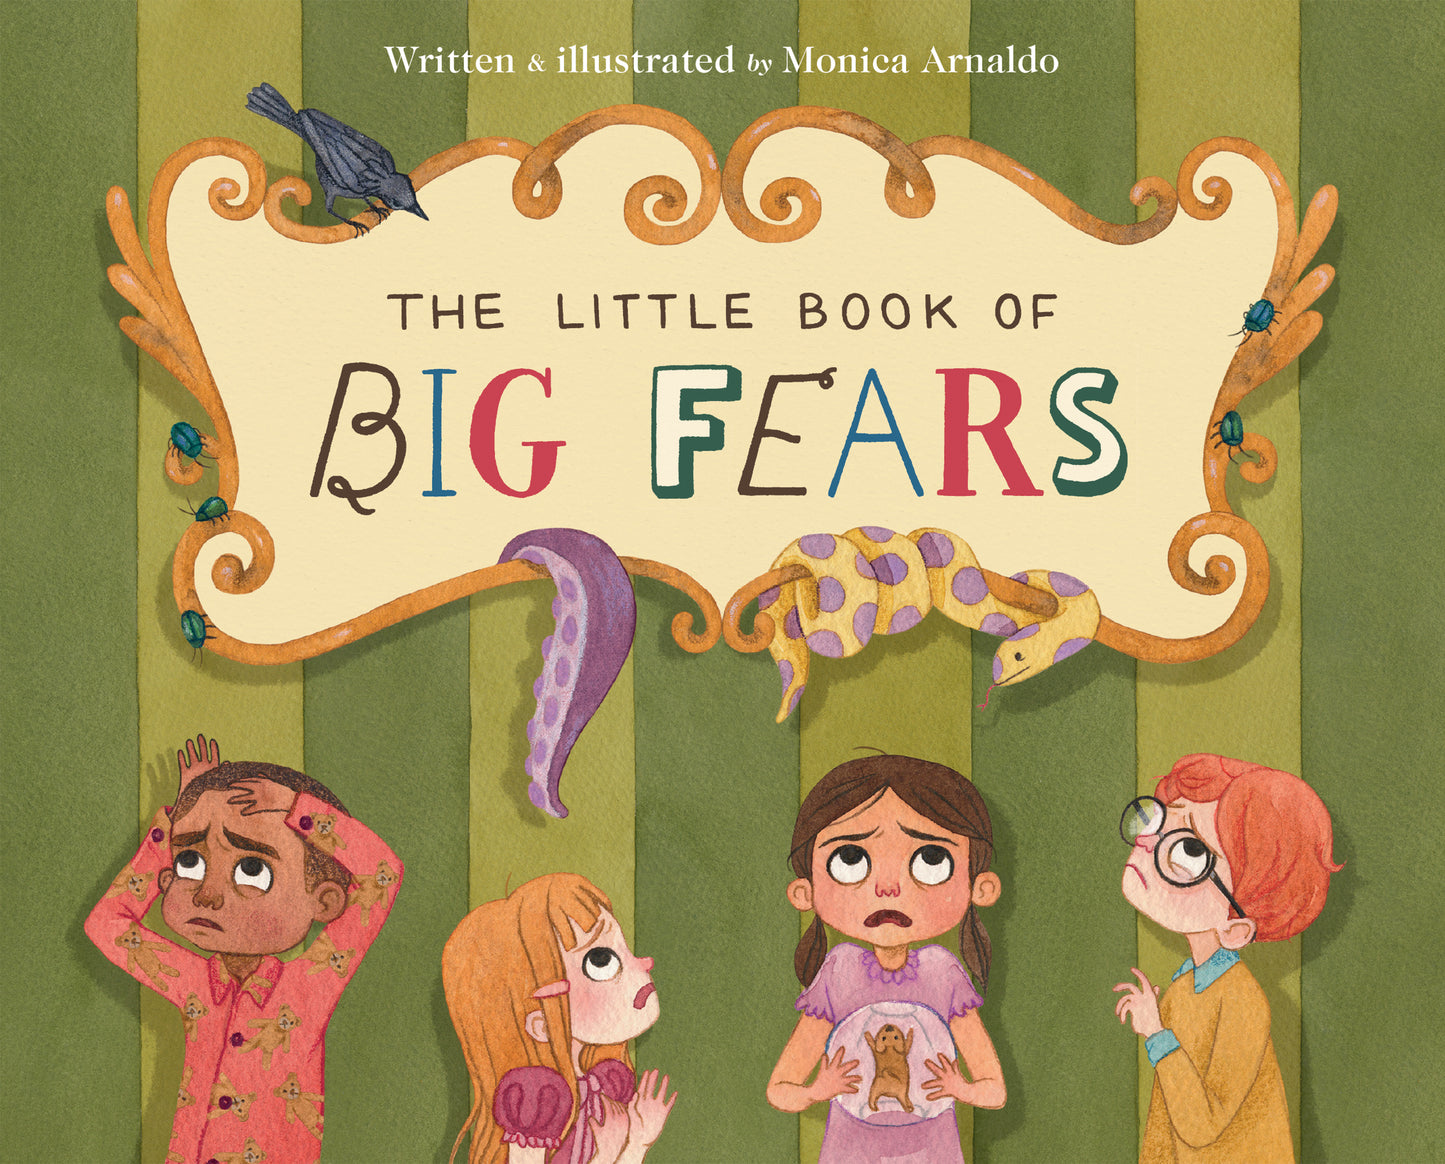 The Little Book of Big Fears